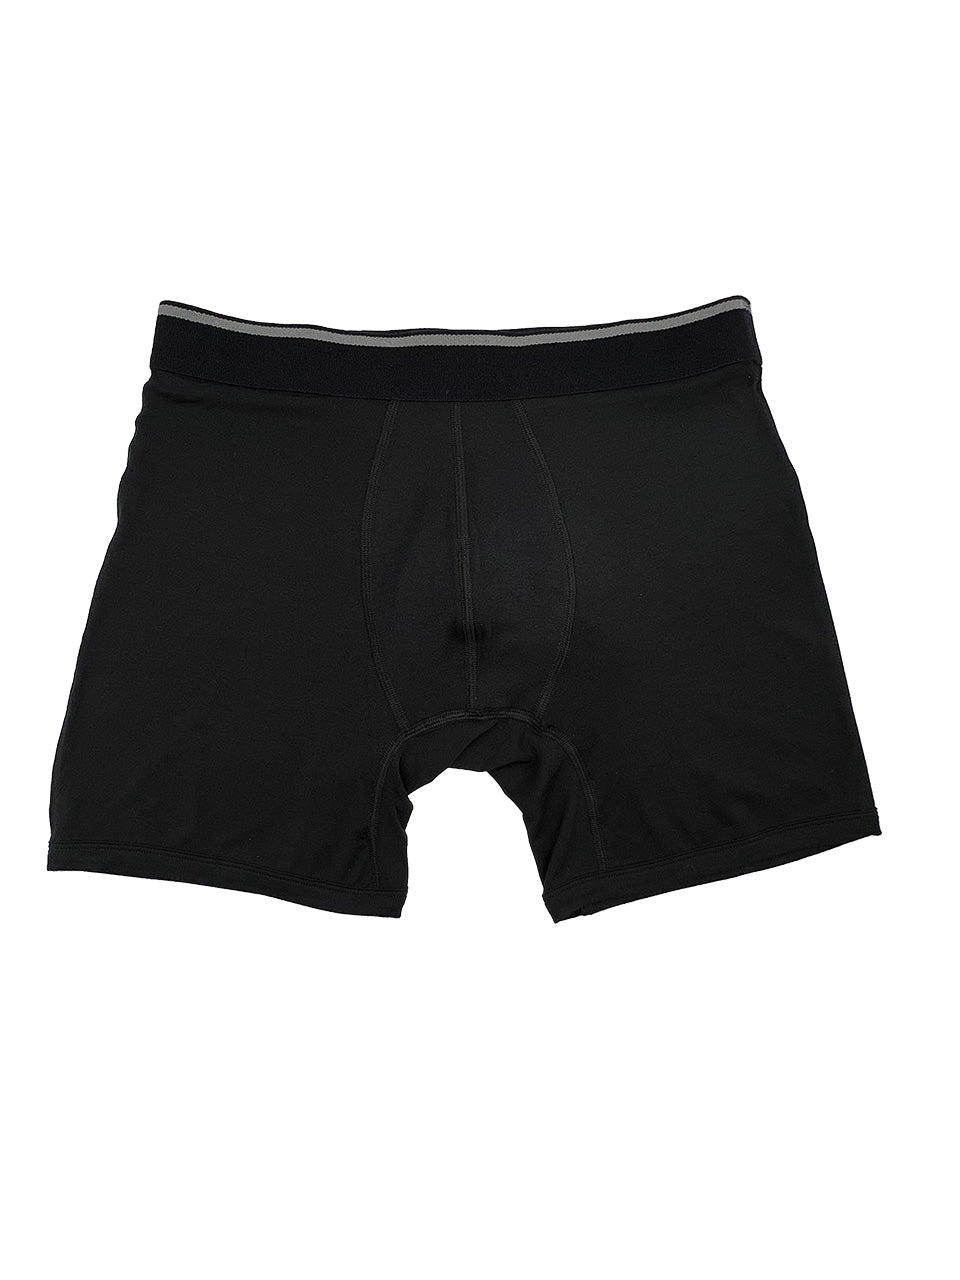 Black Jersey Knit Boxer Brief